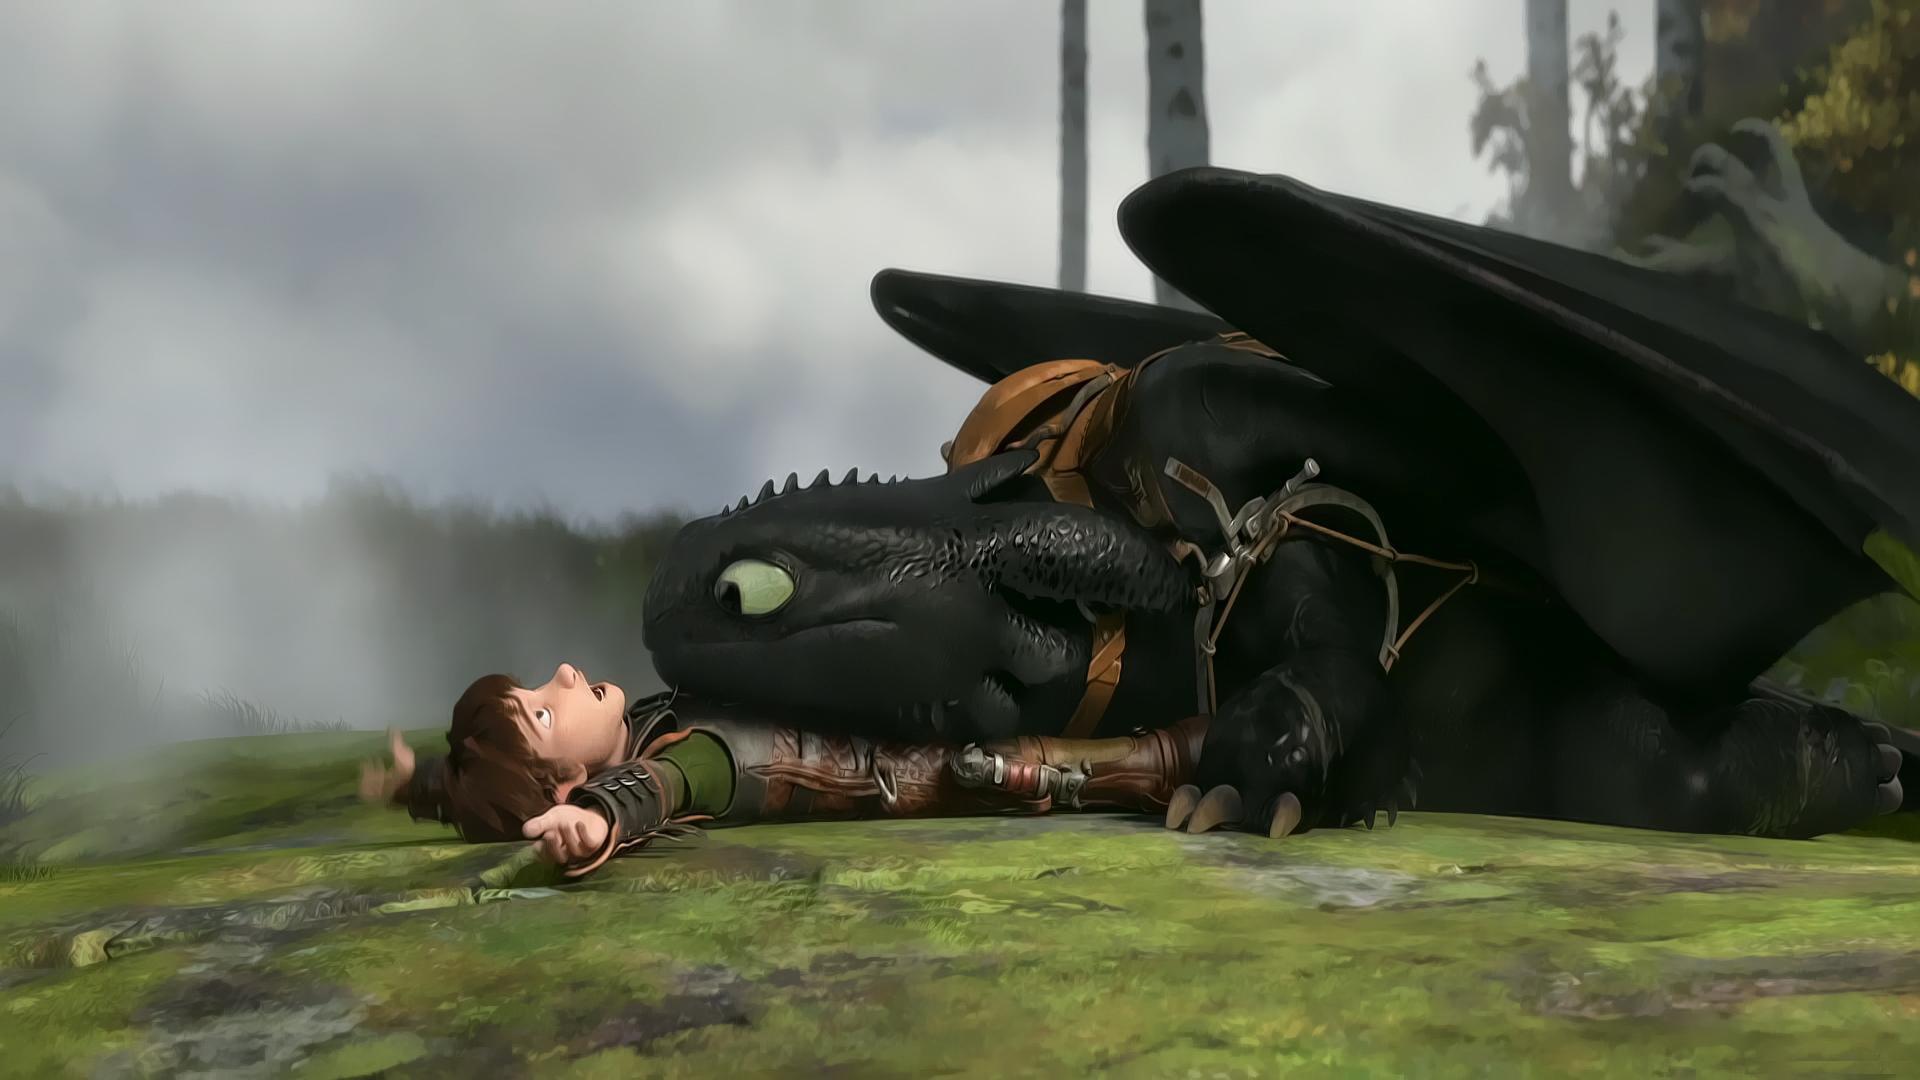 Best How To Train Your Dragon 2 wallpaper for High